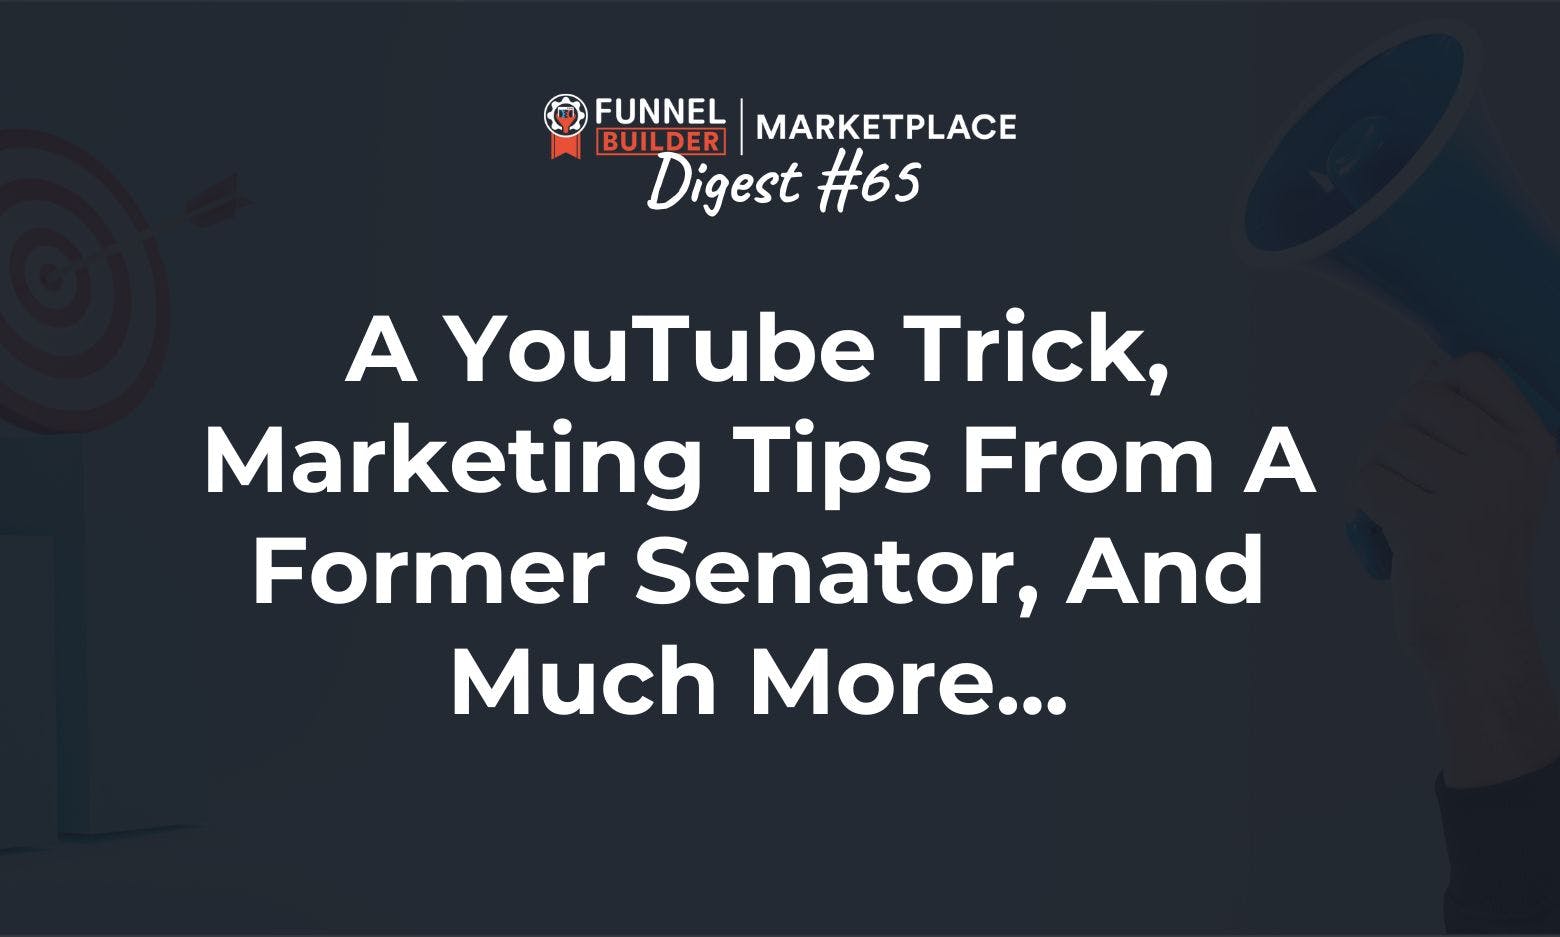 FBM Digest #65: A YouTube trick, marketing tips from a former senator, and much more...